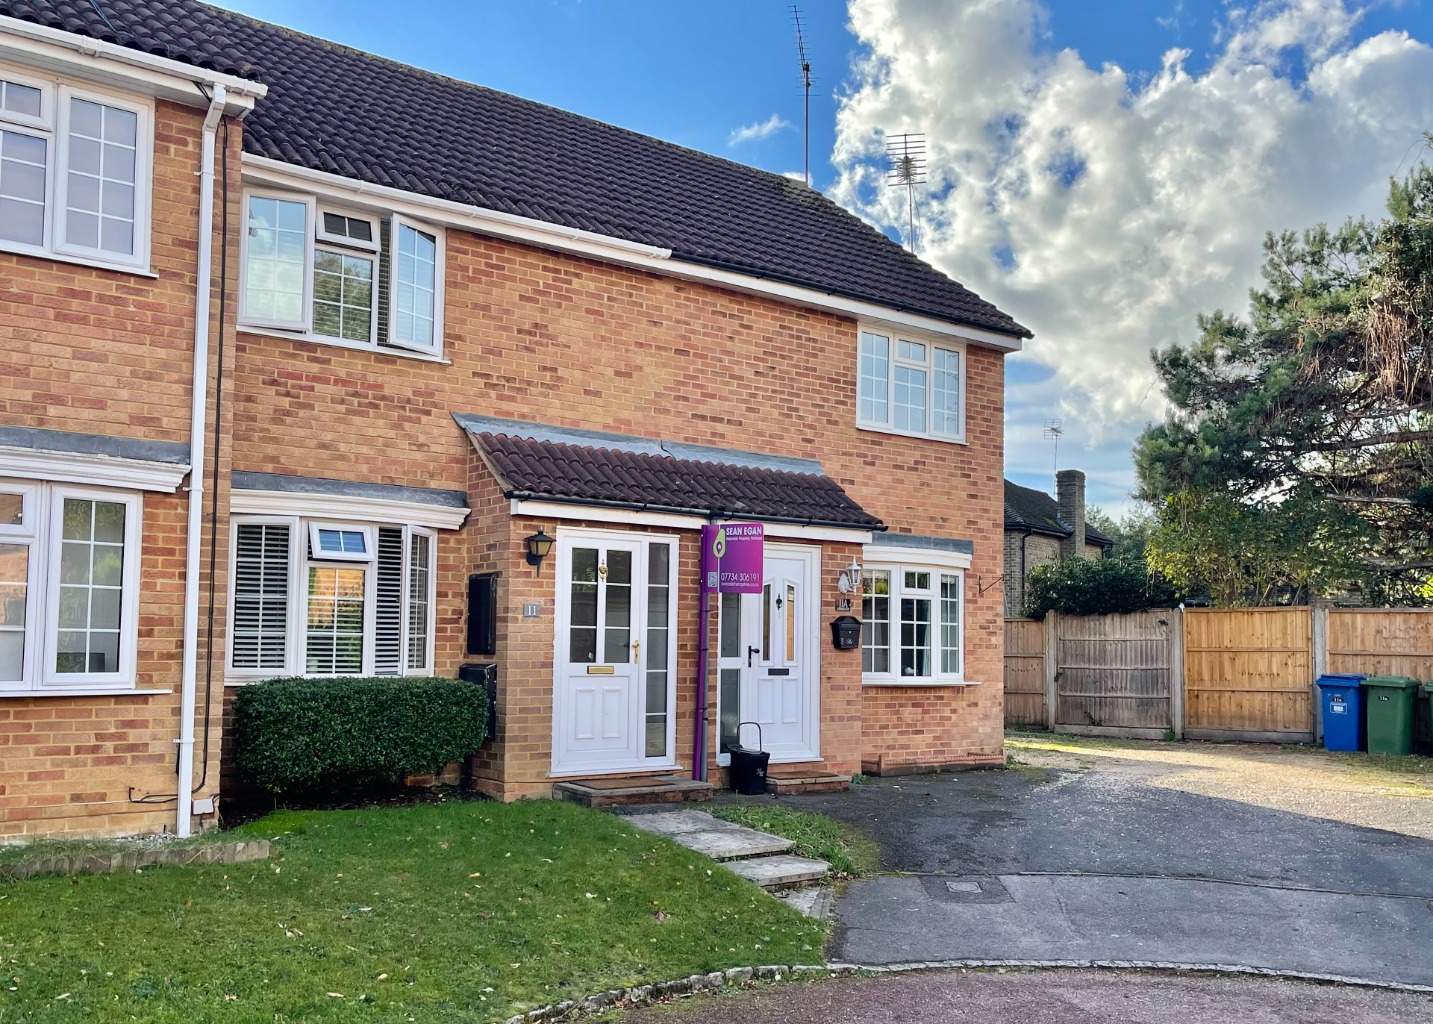 Available with no onward chain is this beautifully presented two bedroom house, located at the end of a peaceful cul de sac within Sandhurst, Heath Park development. To the front is two allocated car parking spaces, plus an abundance of off road visitor bays...